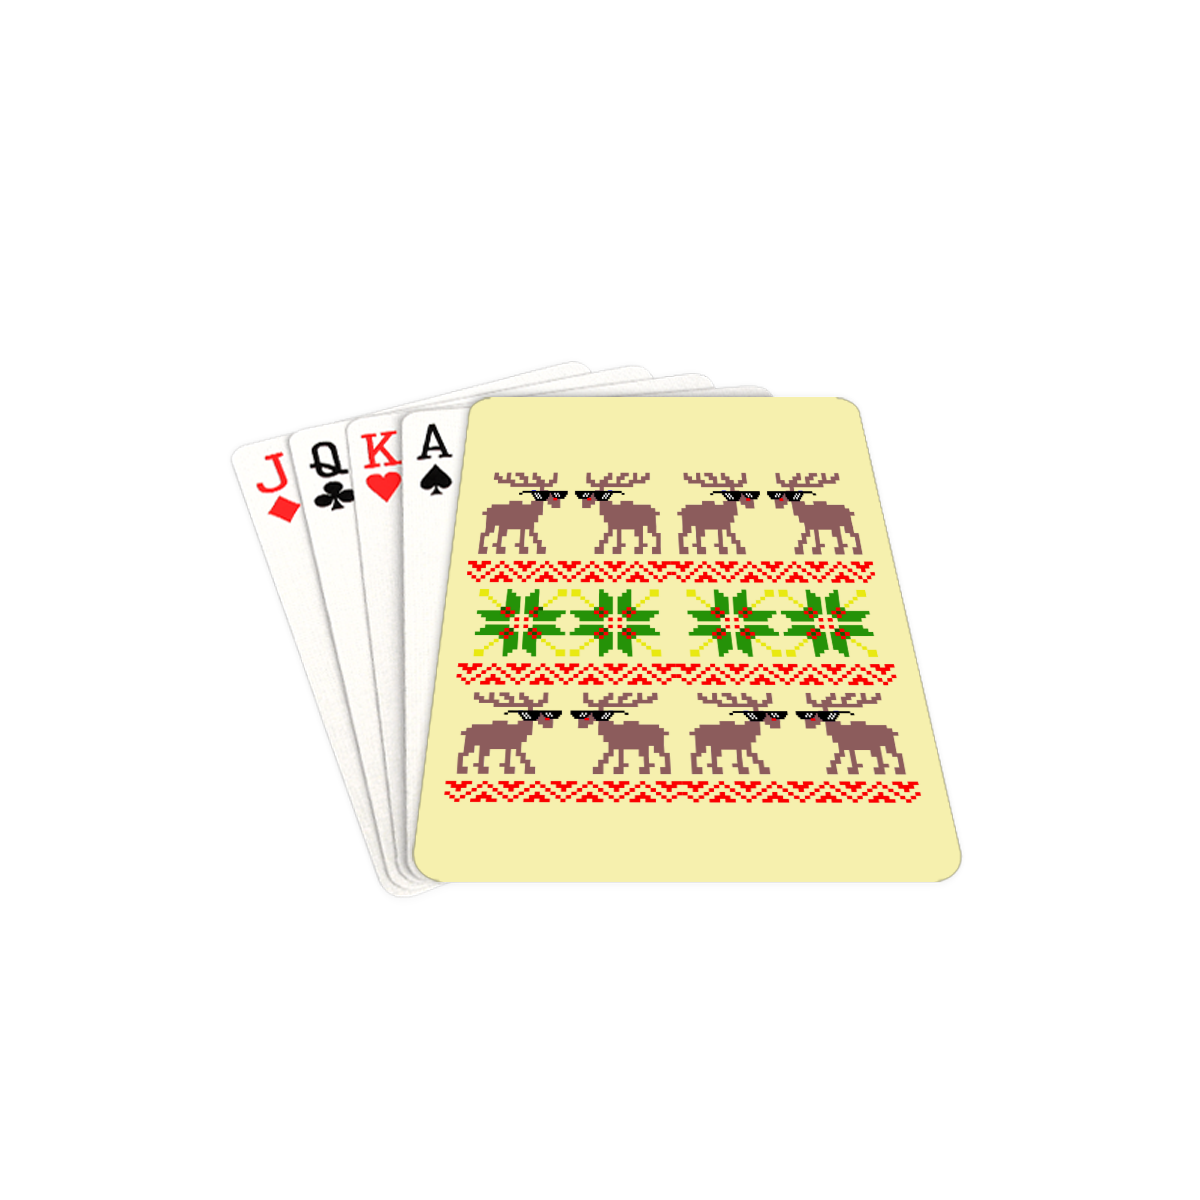 Christmas Ugly Sweater Reindeer (Deal With It ) on Yellow Playing Cards 2.5"x3.5"